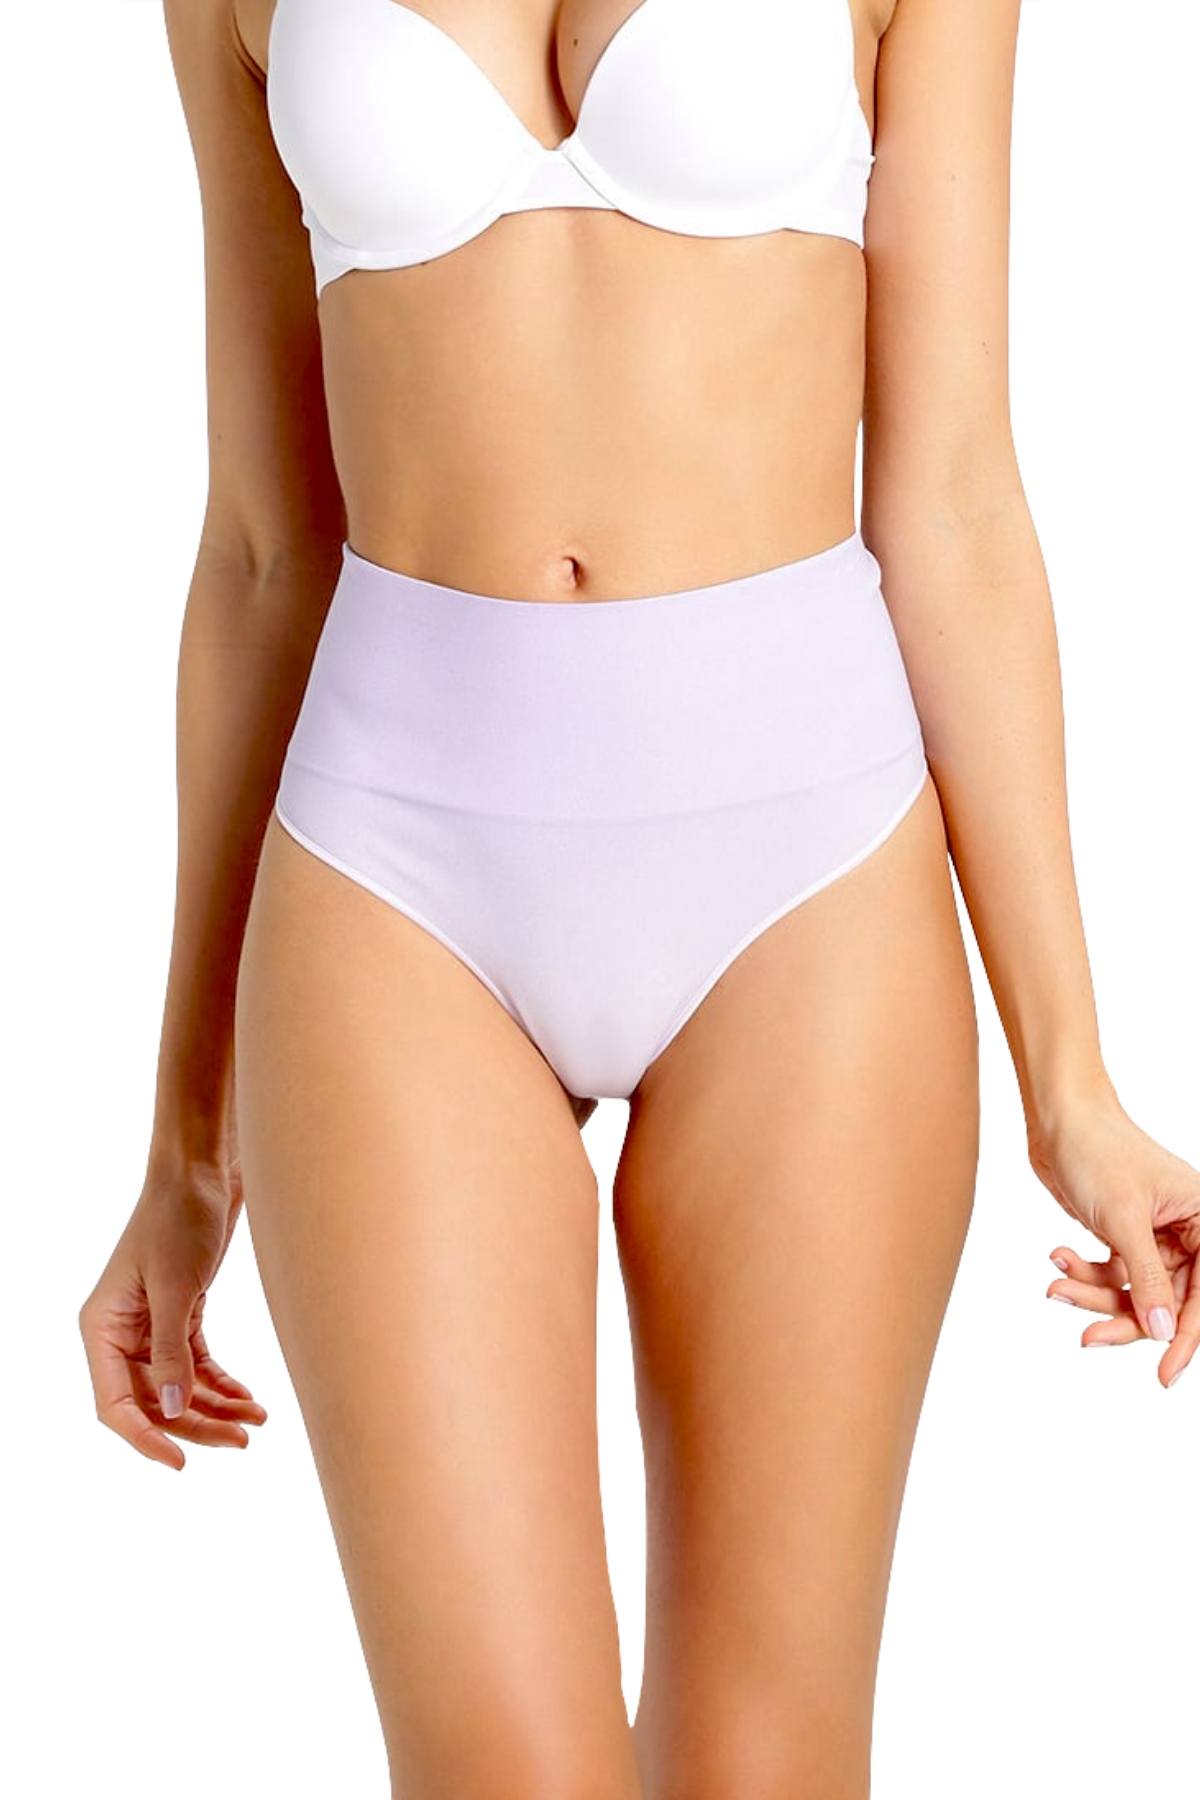 https://www.cheapundies.com/cdn/shop/products/SPANX-Lilac-Ombre-Everyday-Shaping-Thong_68489_4406ad9f-4042-4ffe-89bf-498142d85110.jpg?v=1571438018&width=1200